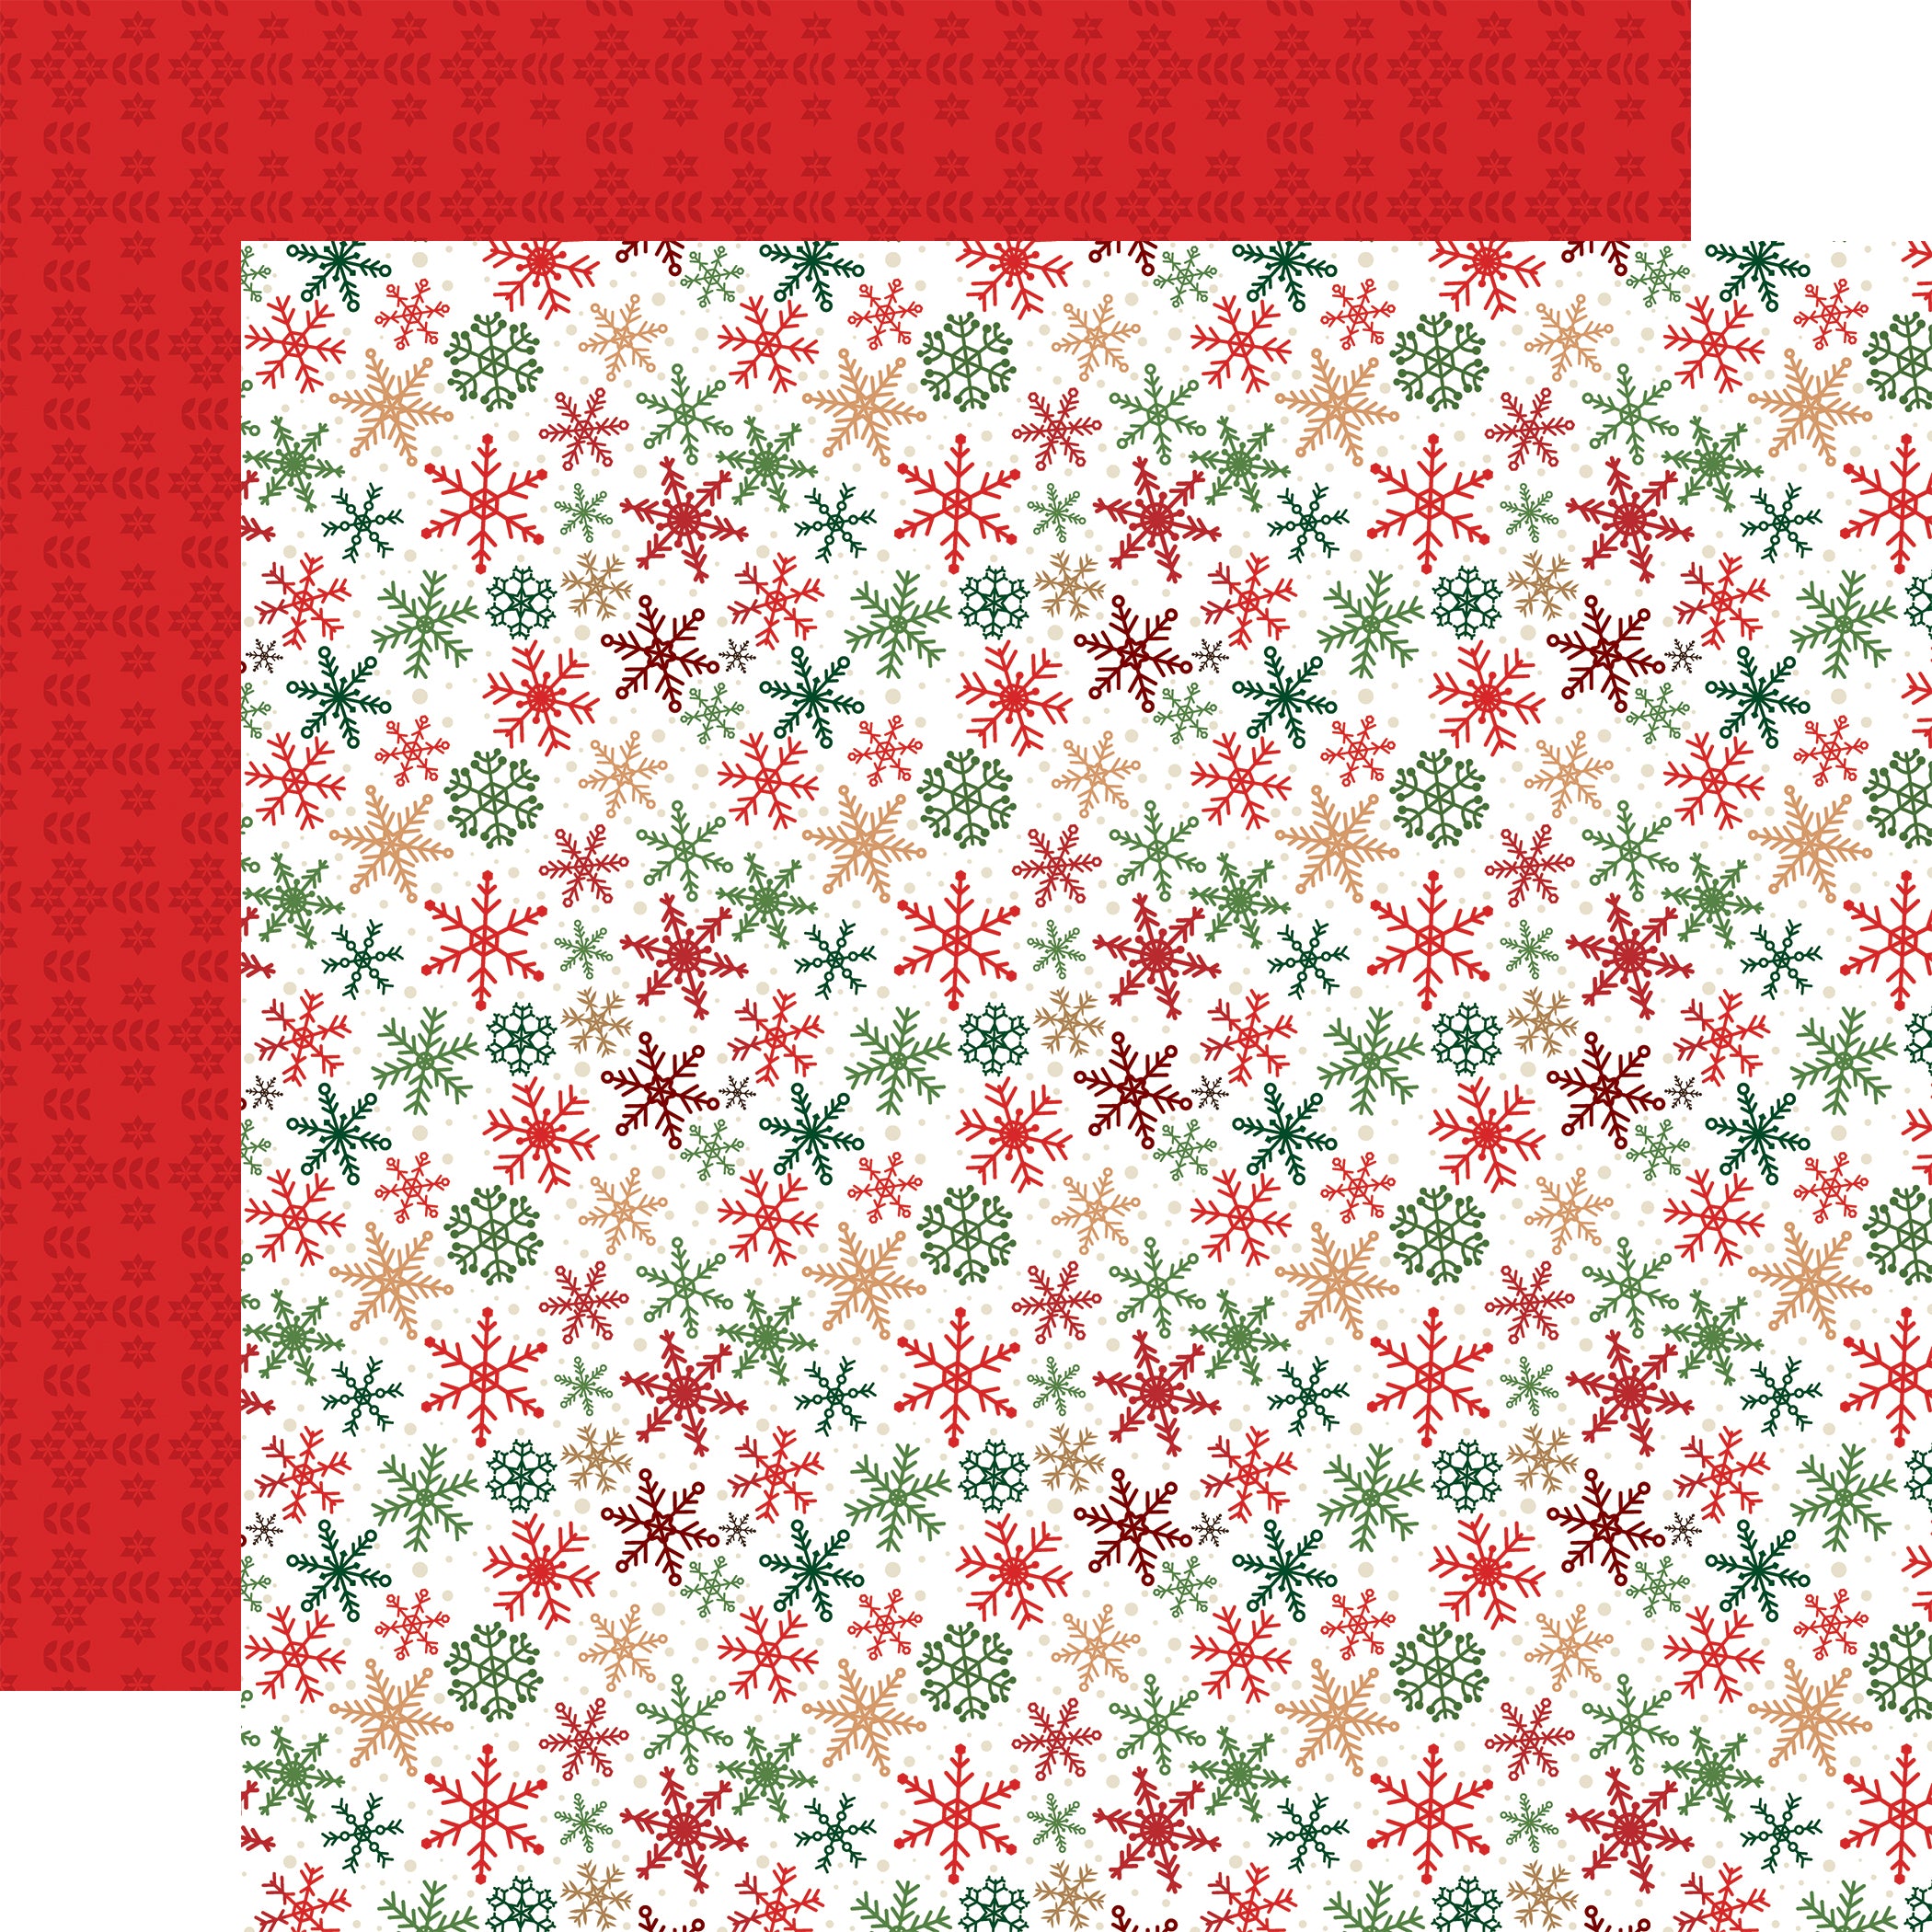 Have A Holly Jolly Christmas Collection Snowflake Sweets 12 x 12 Double-Sided Scrapbook Paper by Echo Park Paper